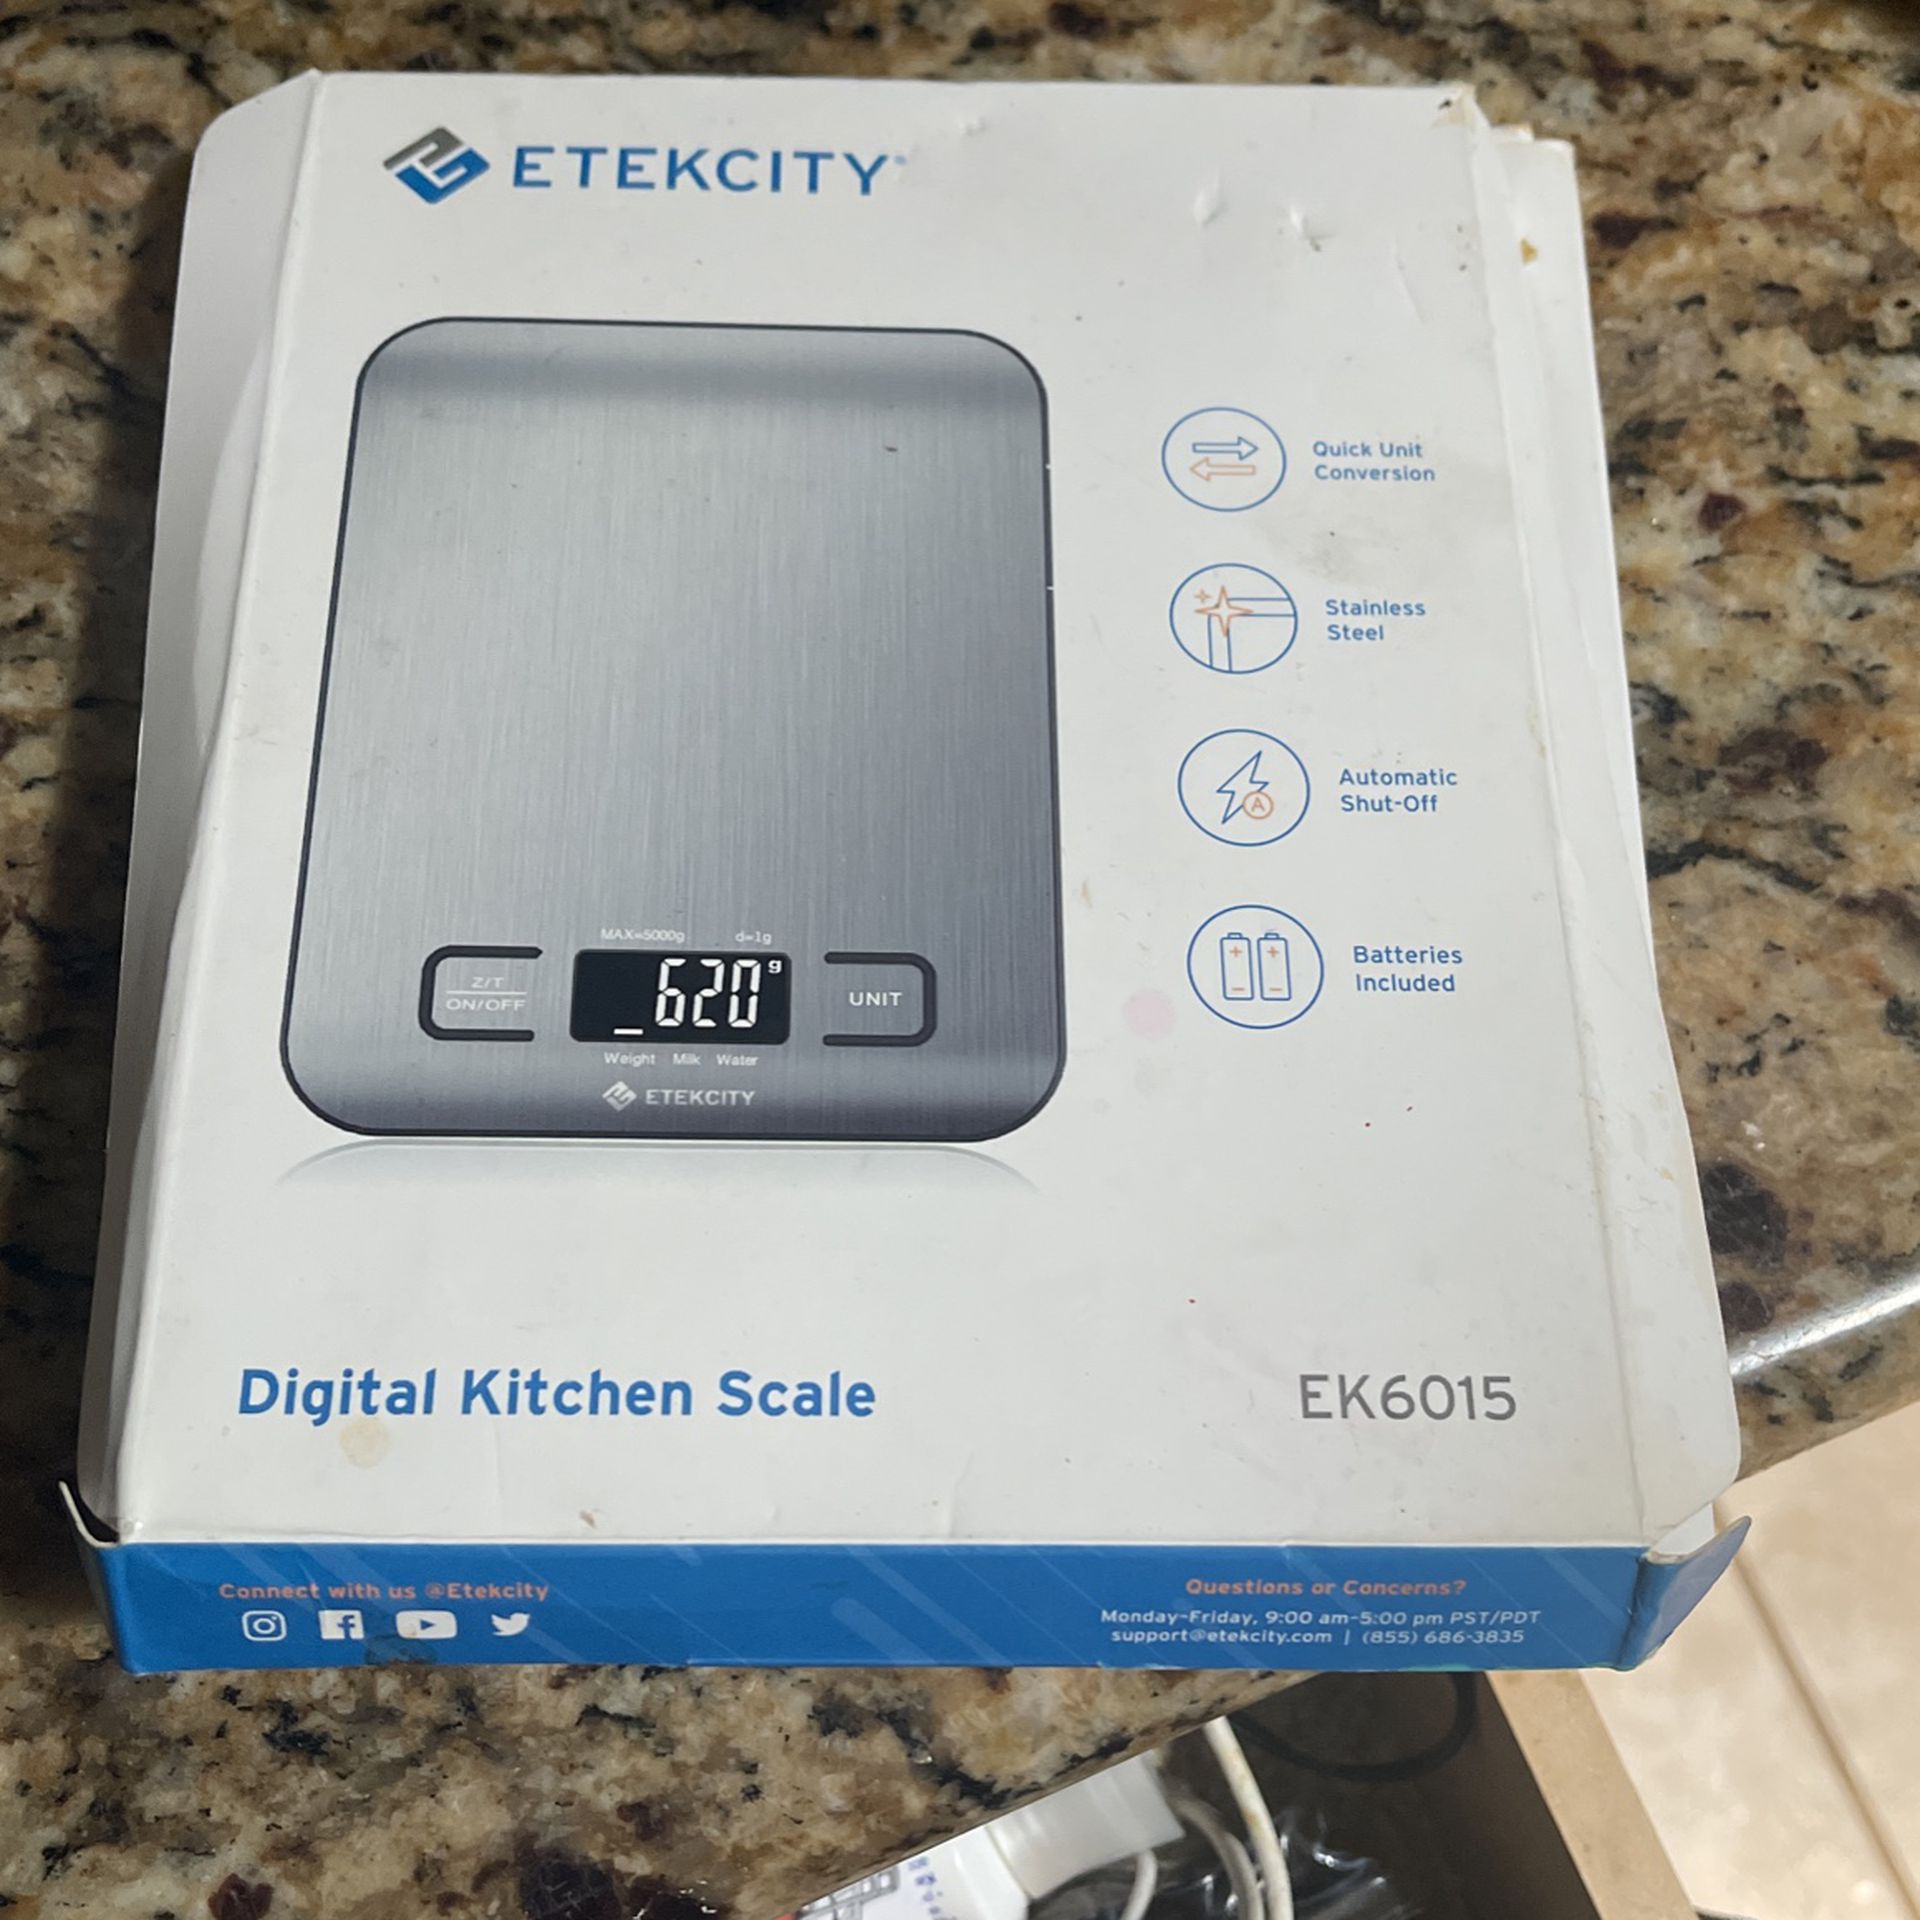 Digital kitchen scale to weigh almost anything